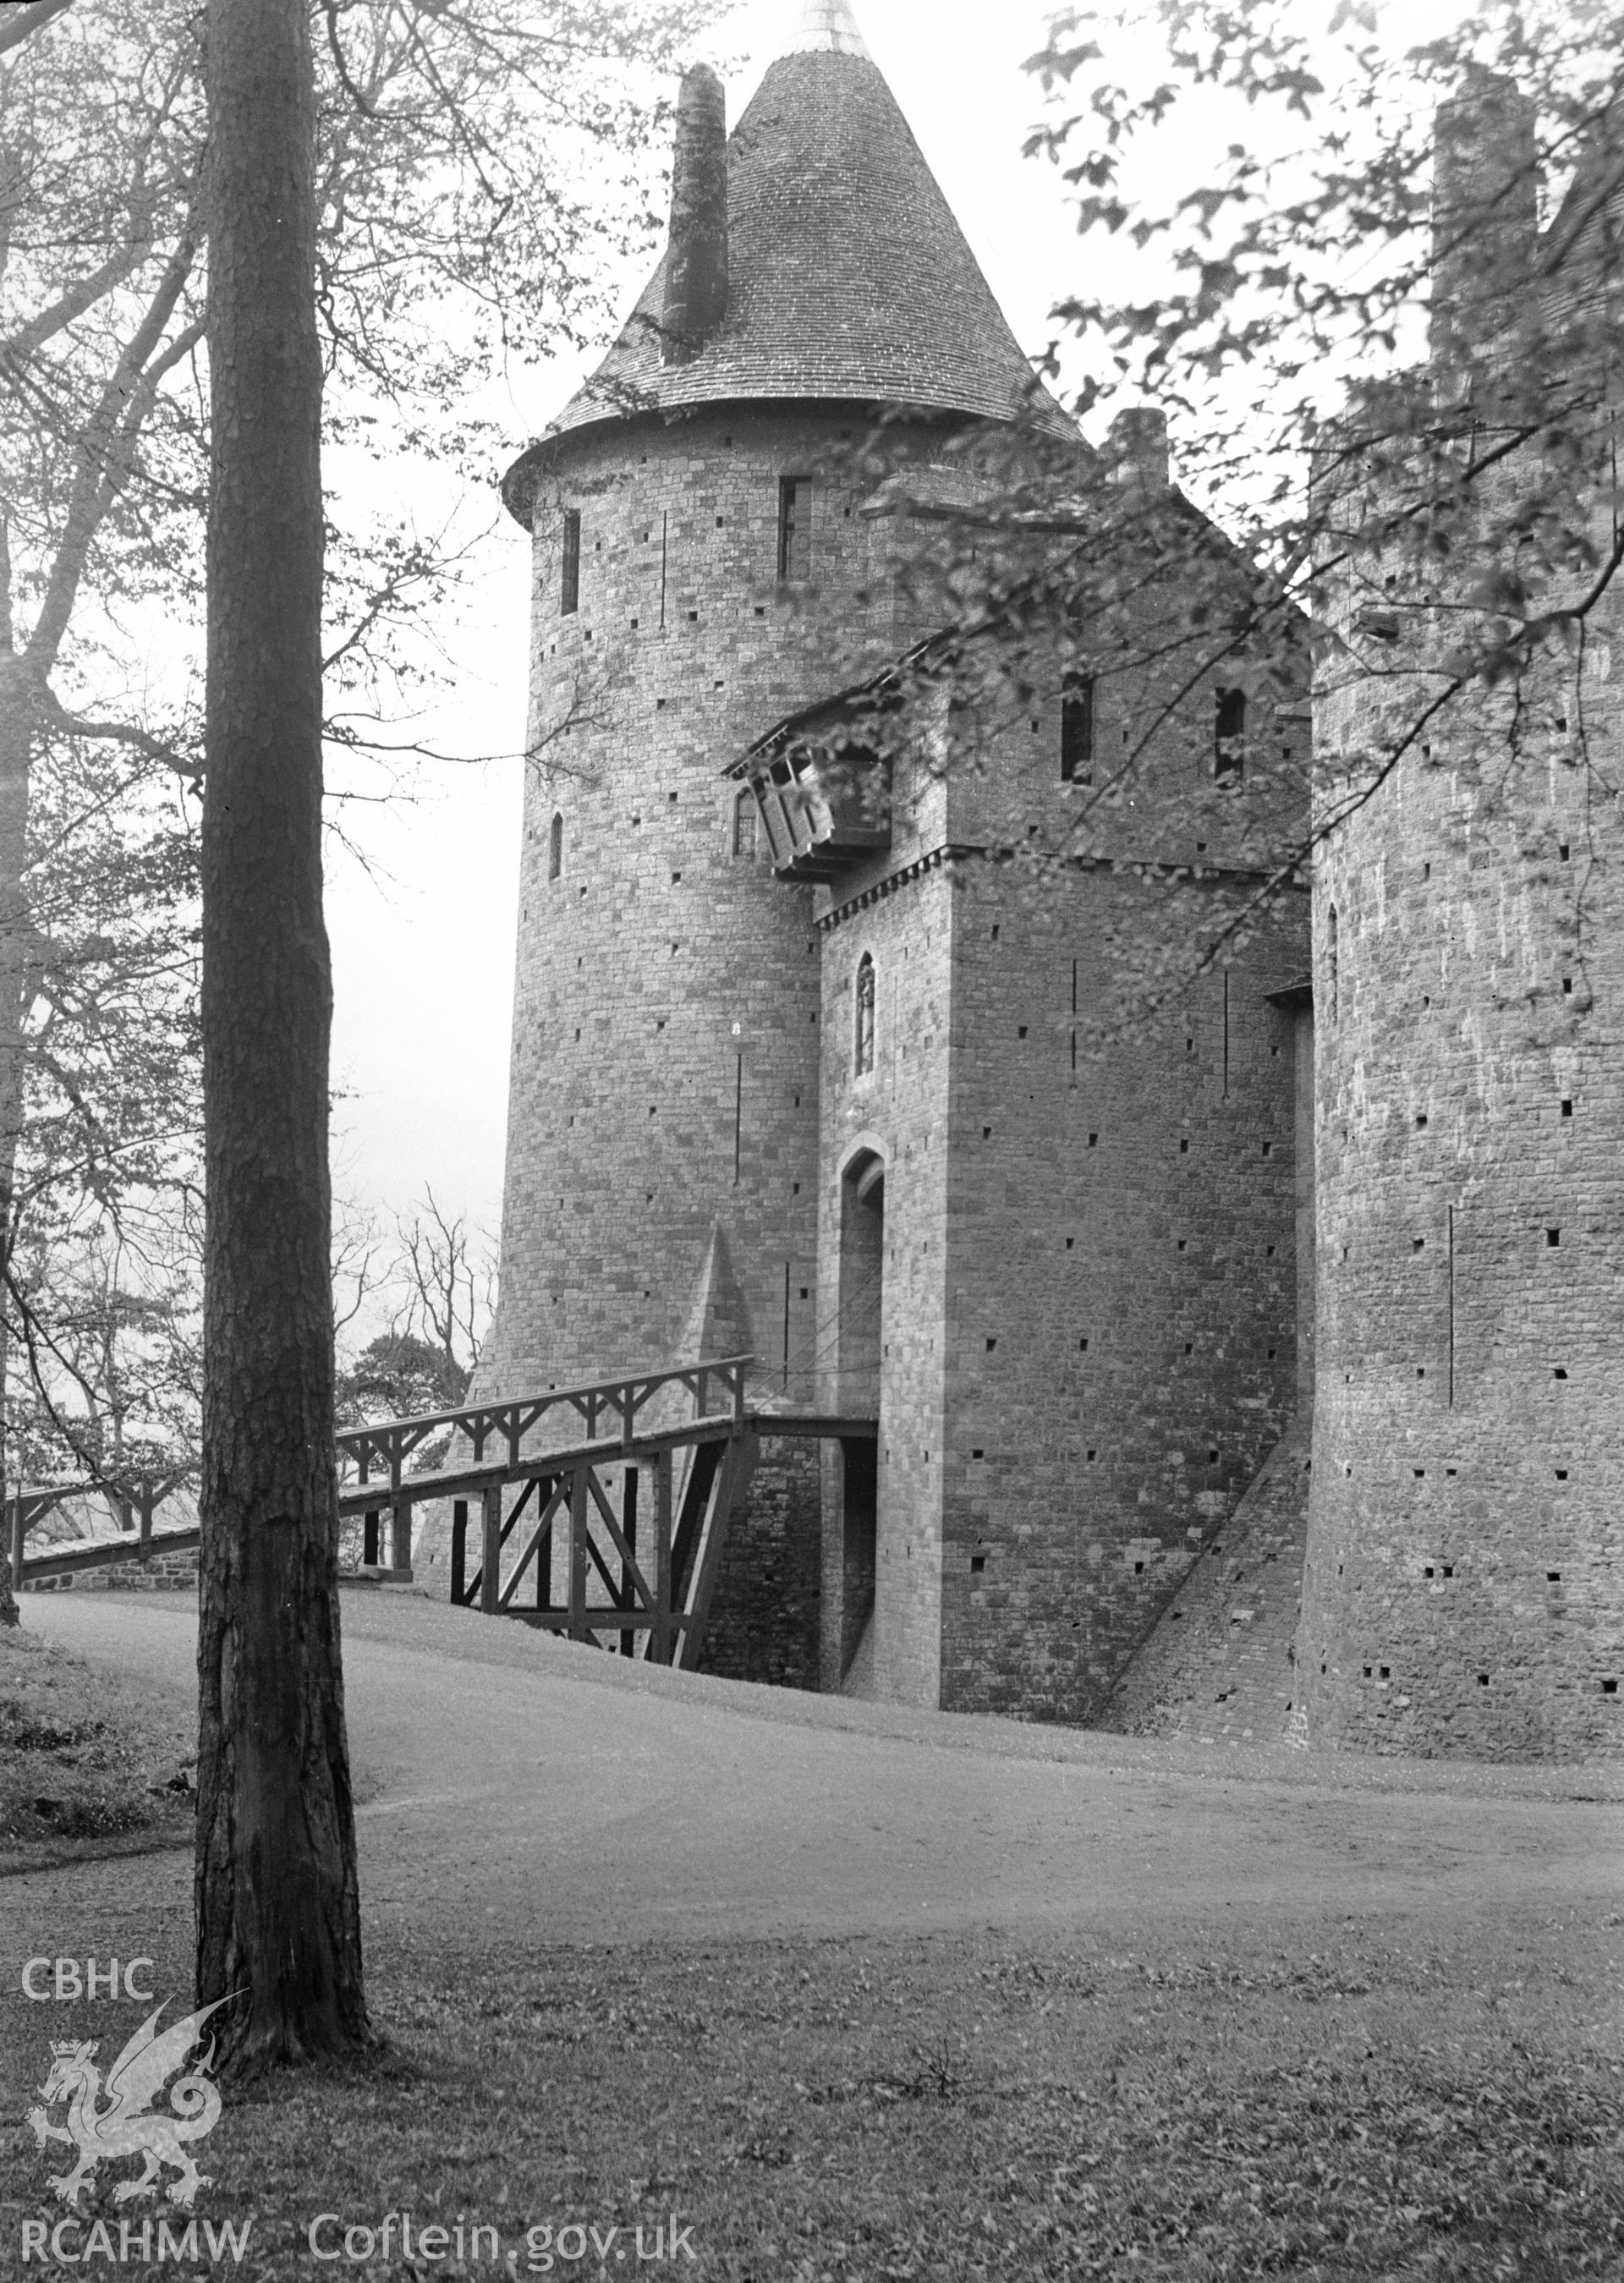 Digital copy of a nitrate negative showing a view of Castell Coch taken by Ordnance Survey.